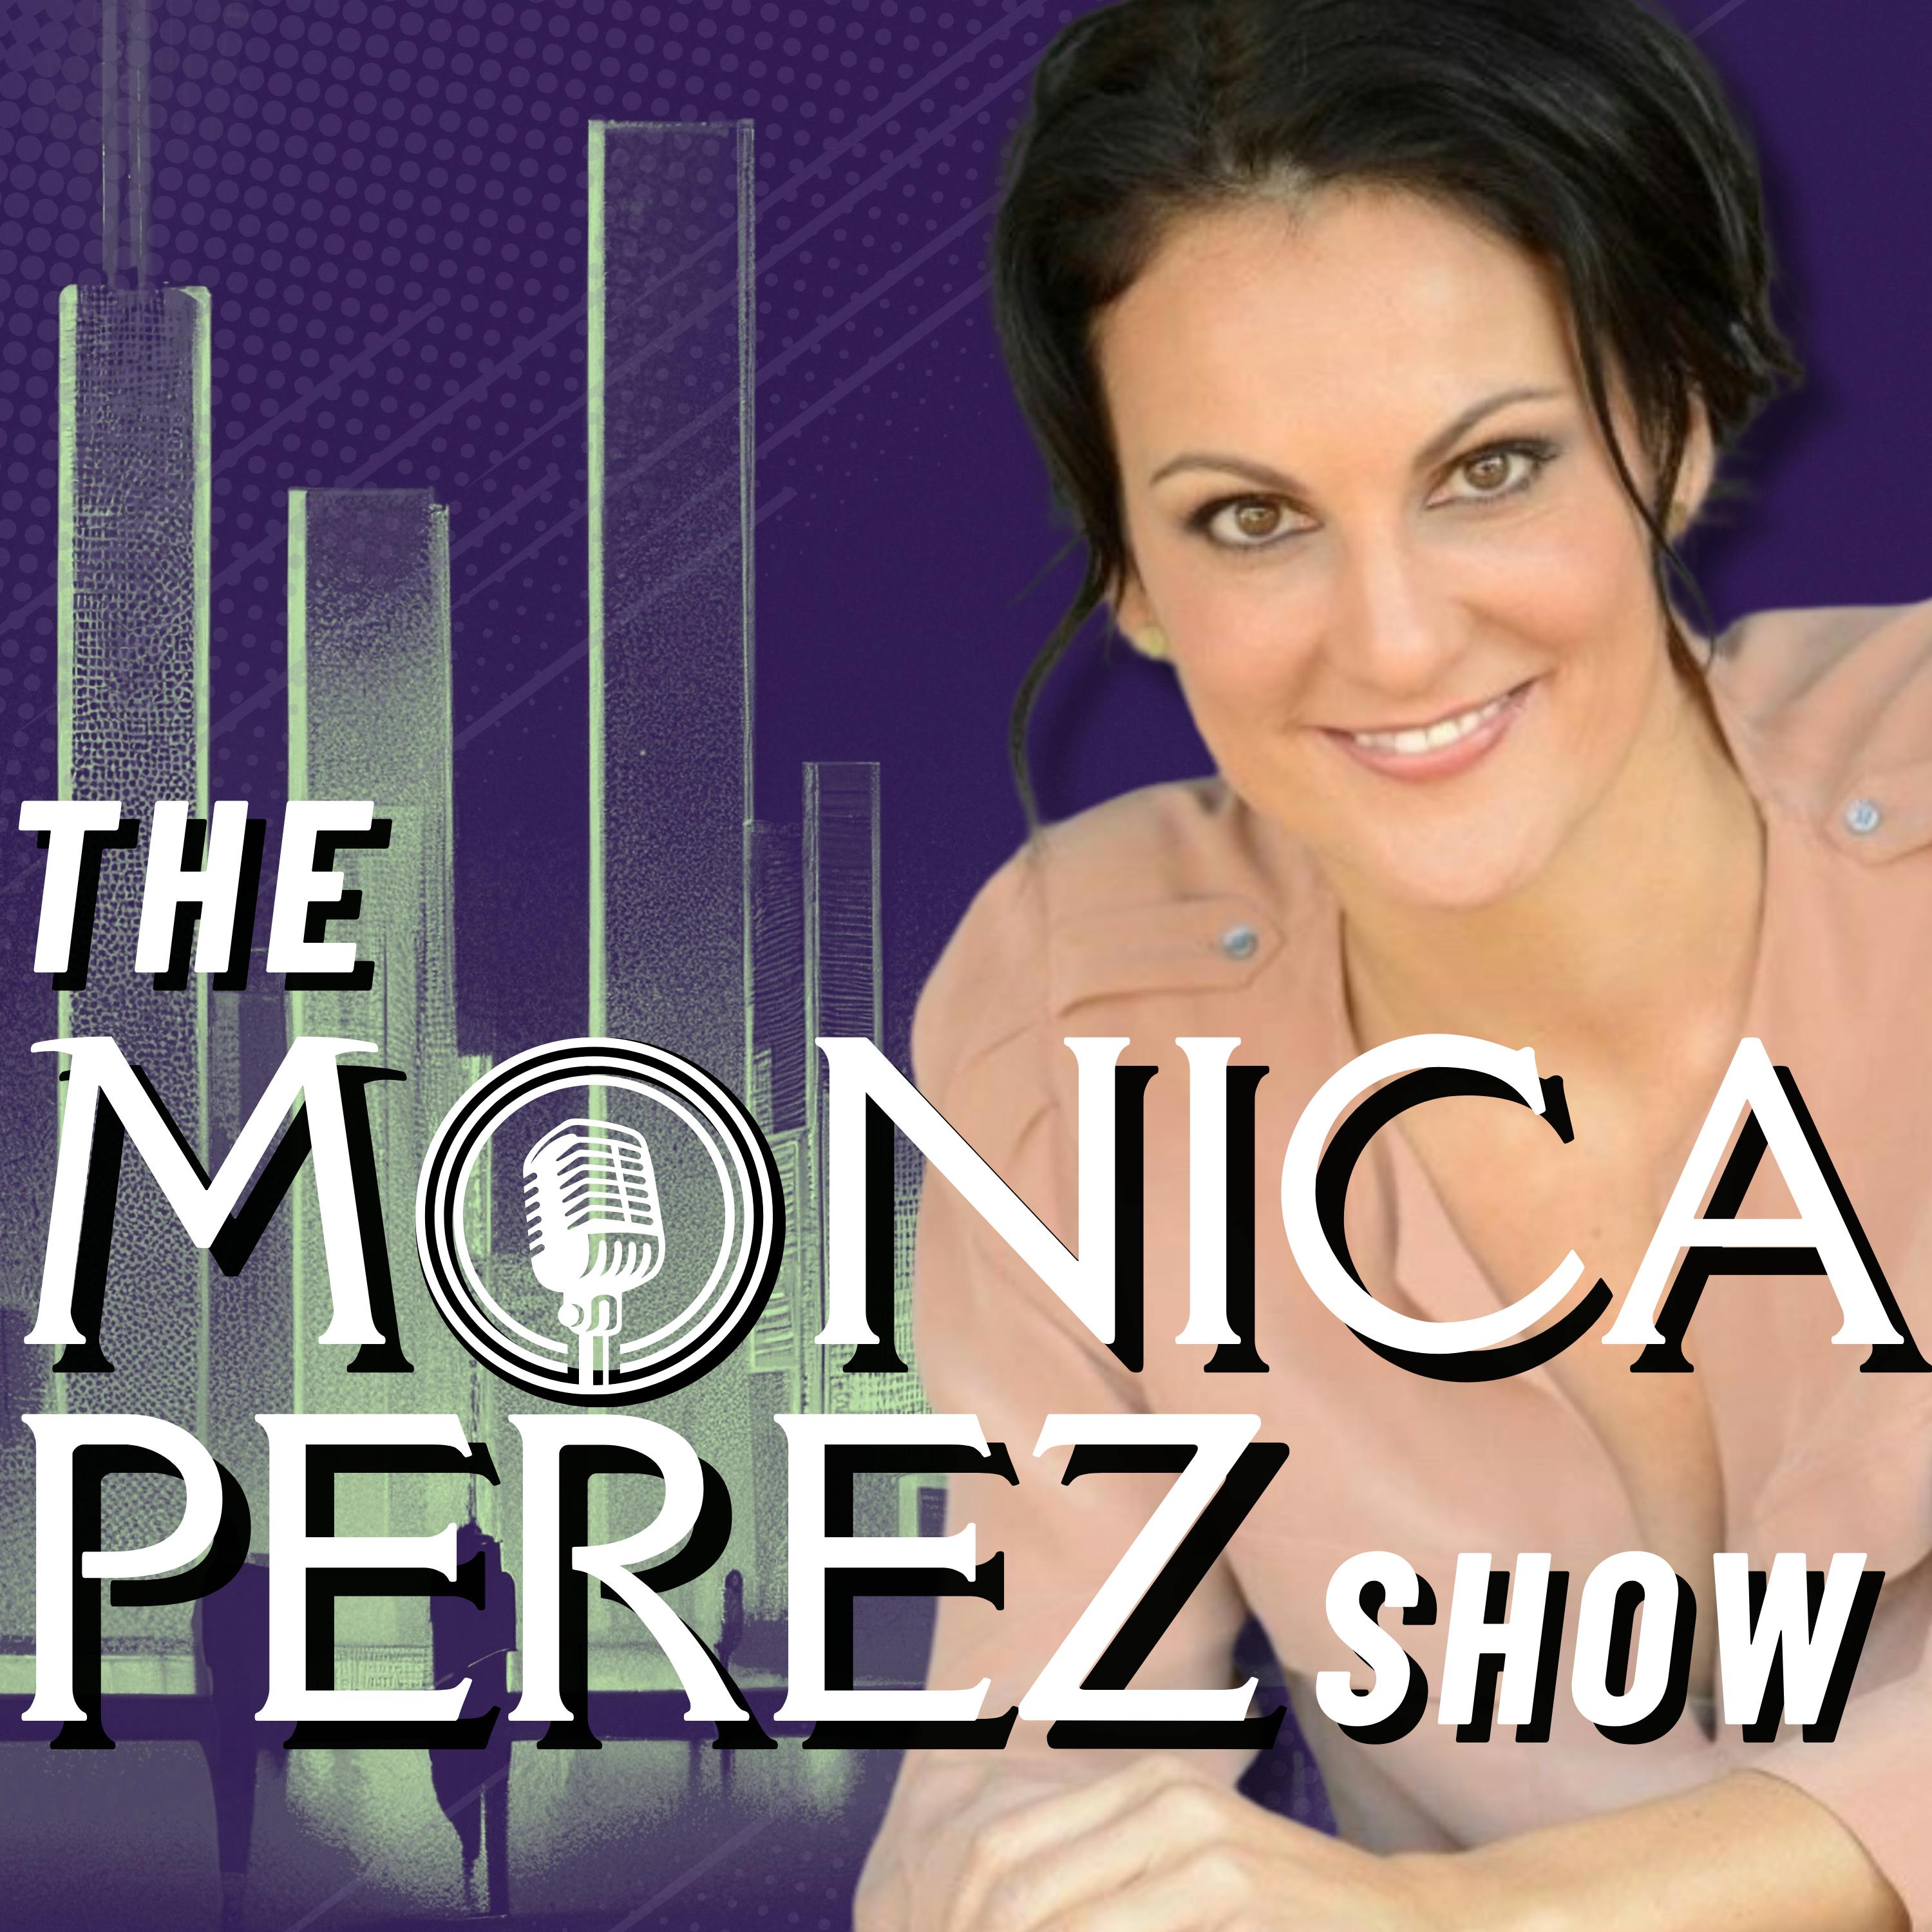 A Conversation with James Delingpole - The Best of the Monica Perez Show